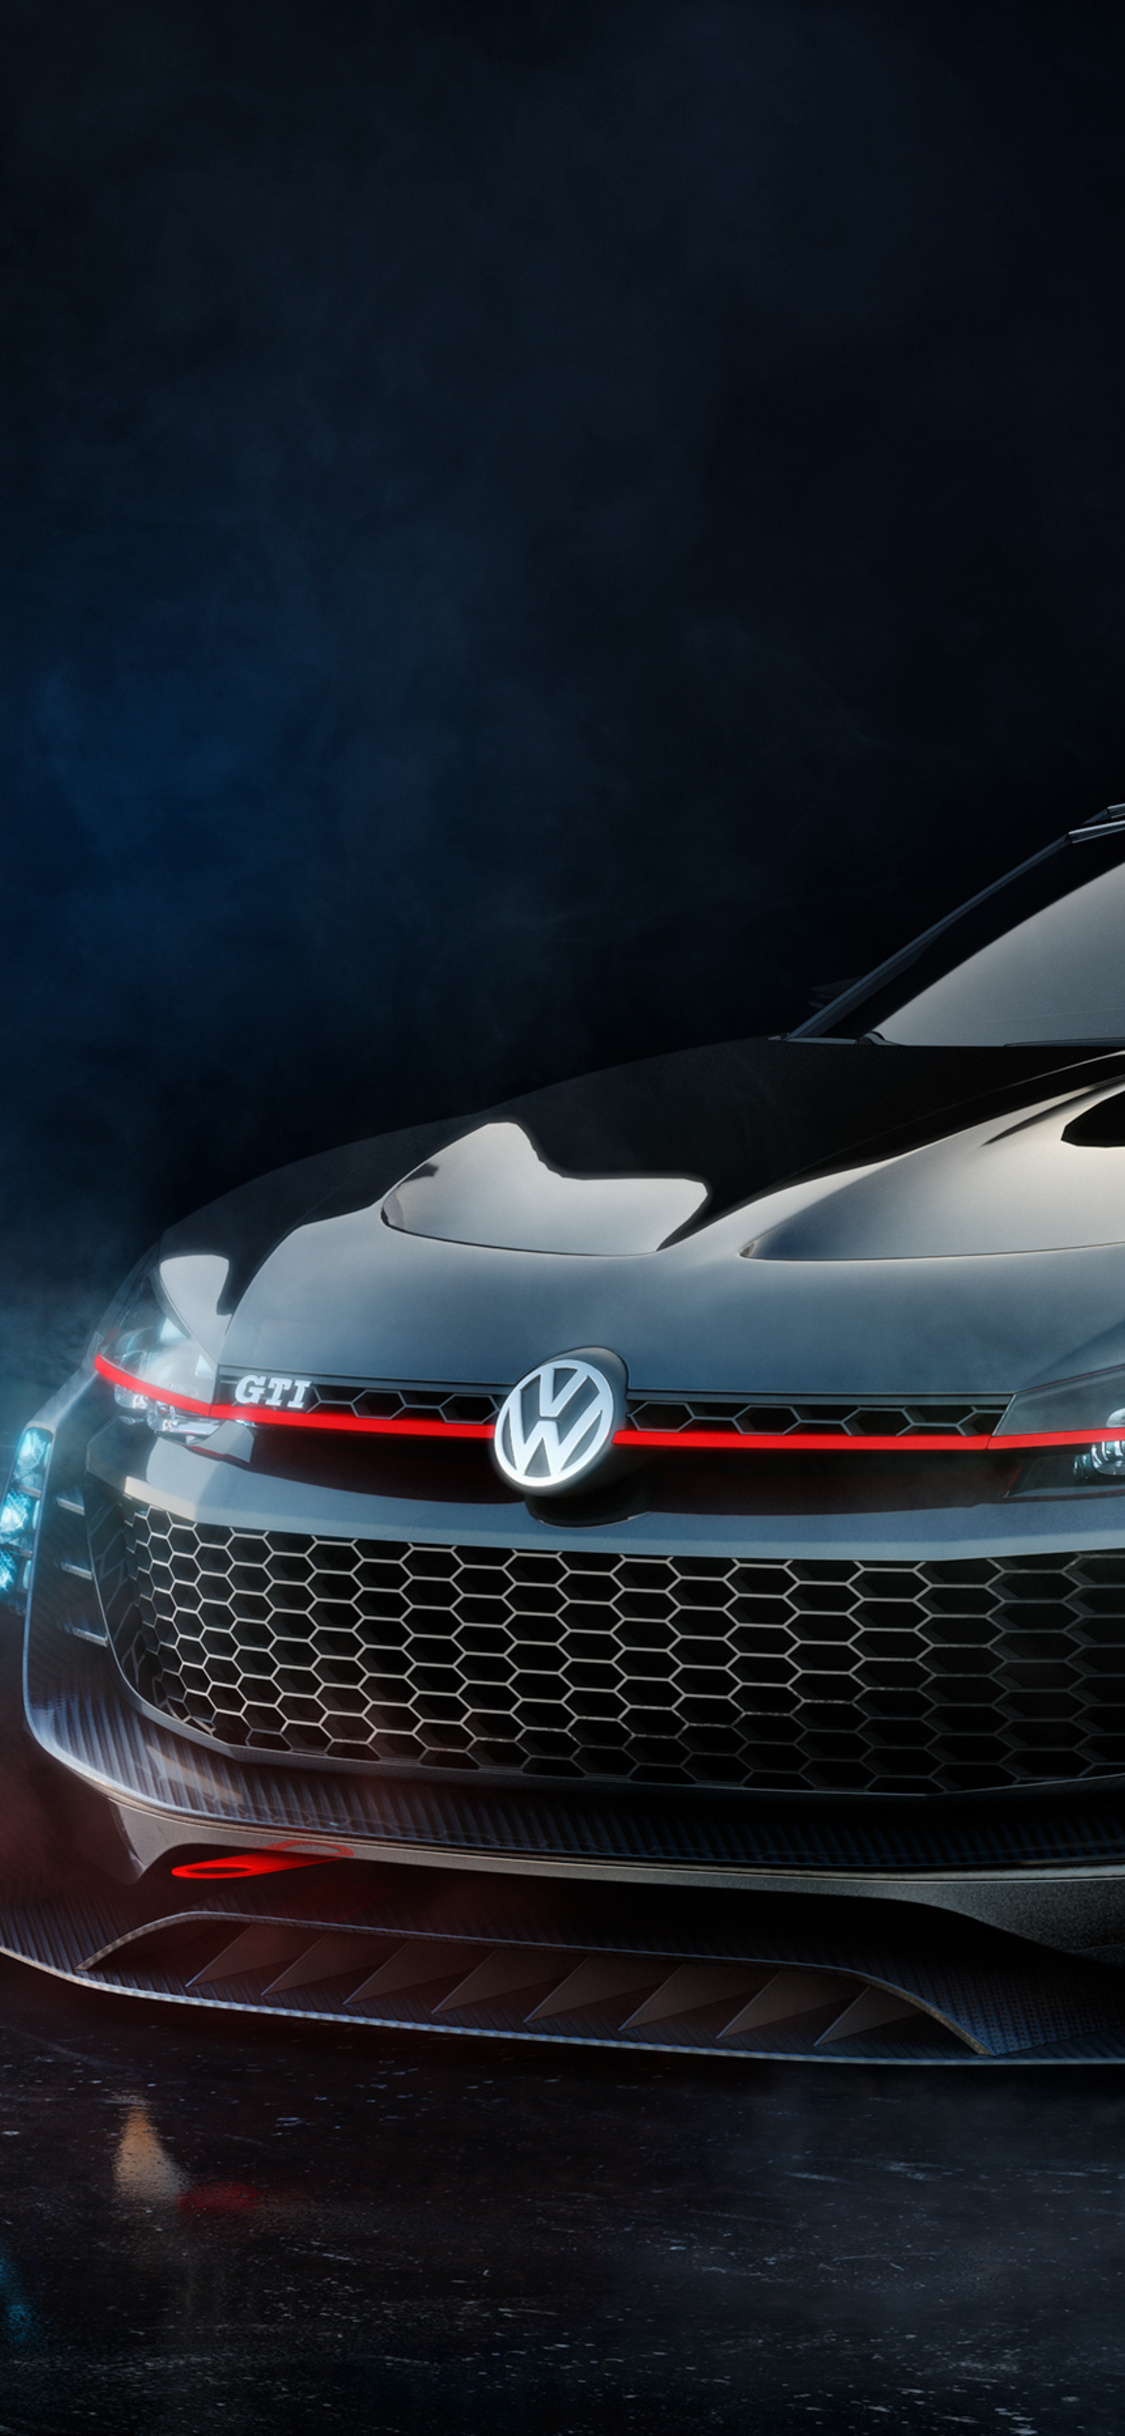 GTI gaming excitement, Gran Turismo inspiration, Captivating visuals, High-speed thrills, 1130x2440 HD Handy